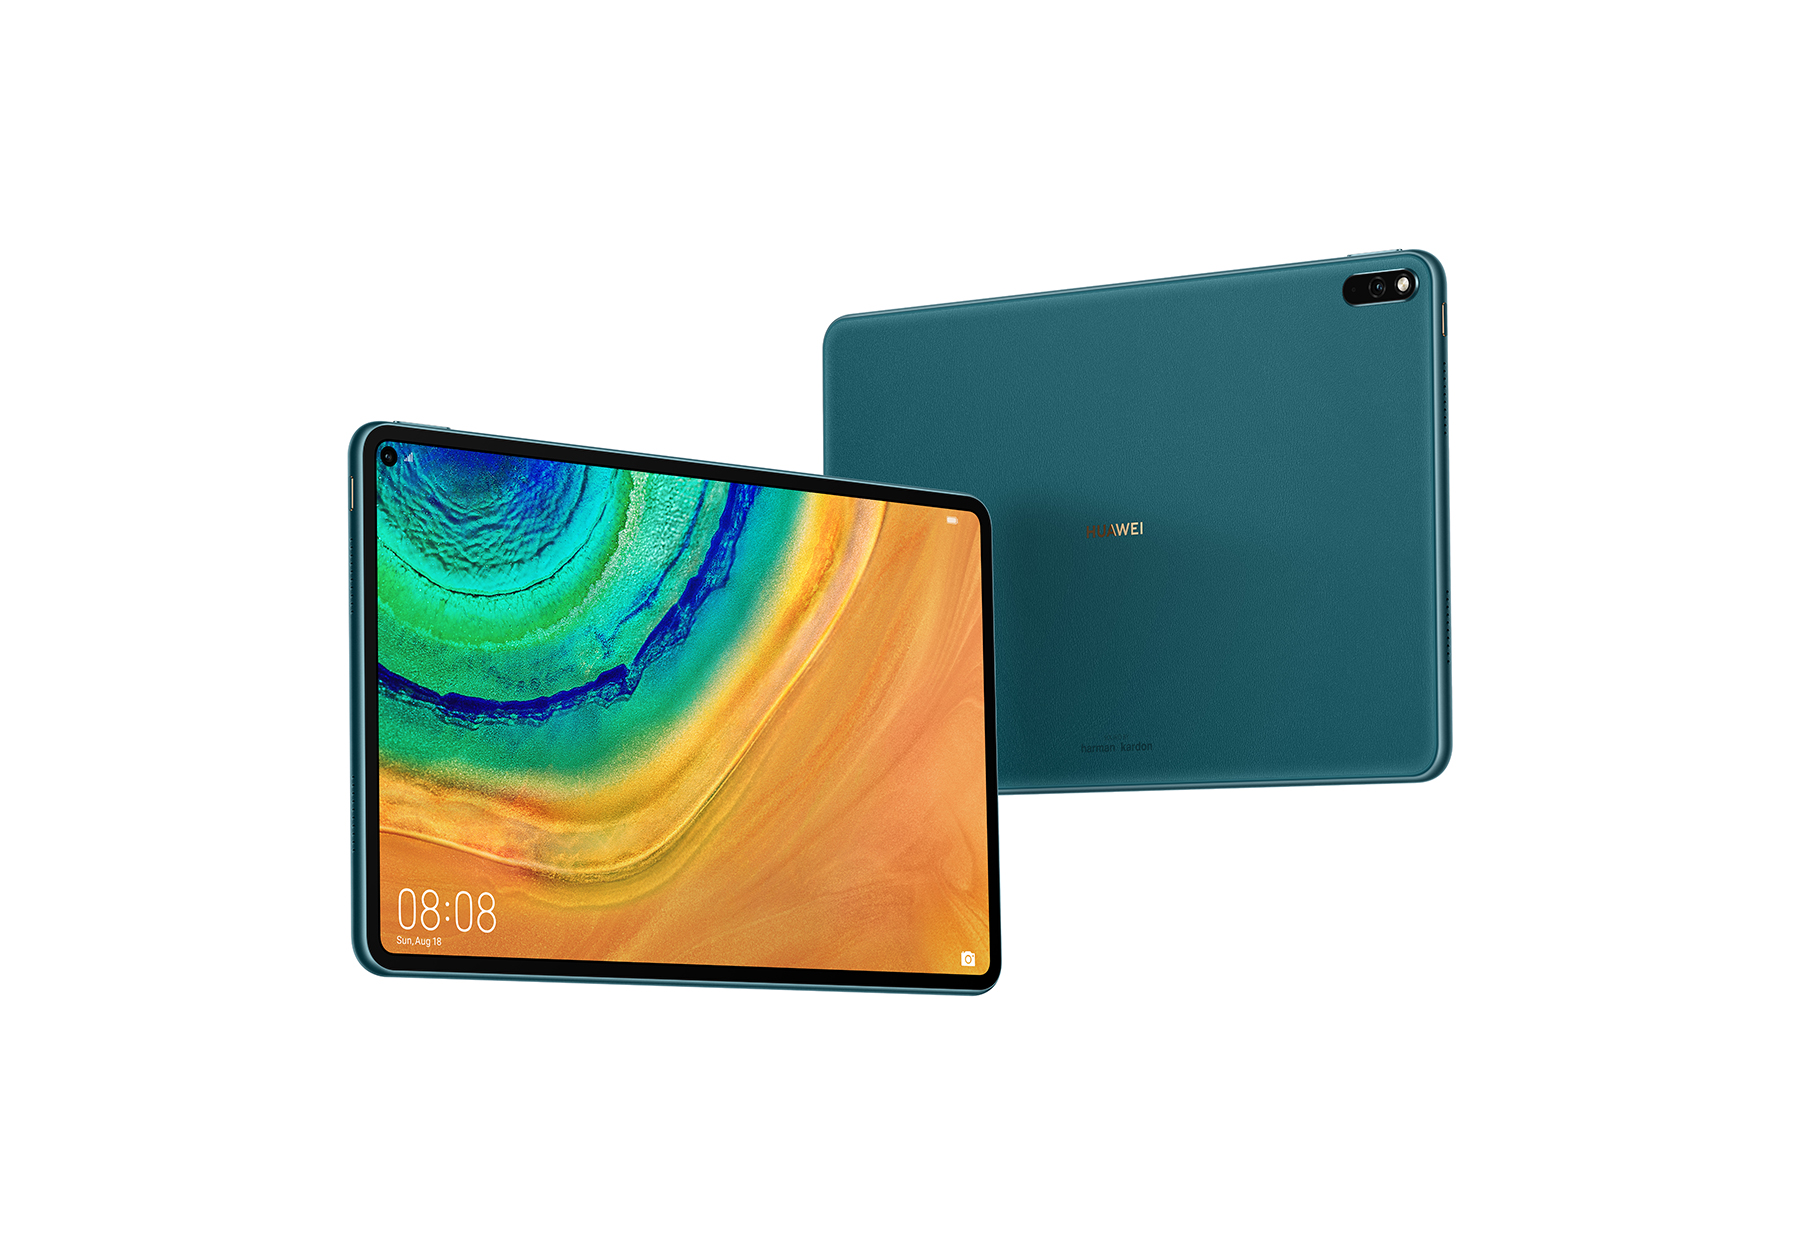 Image for HUAWEI MatePad Pro 5G Launches In The UAE With Powerful Productivity And Entertainment Capabilities In Style